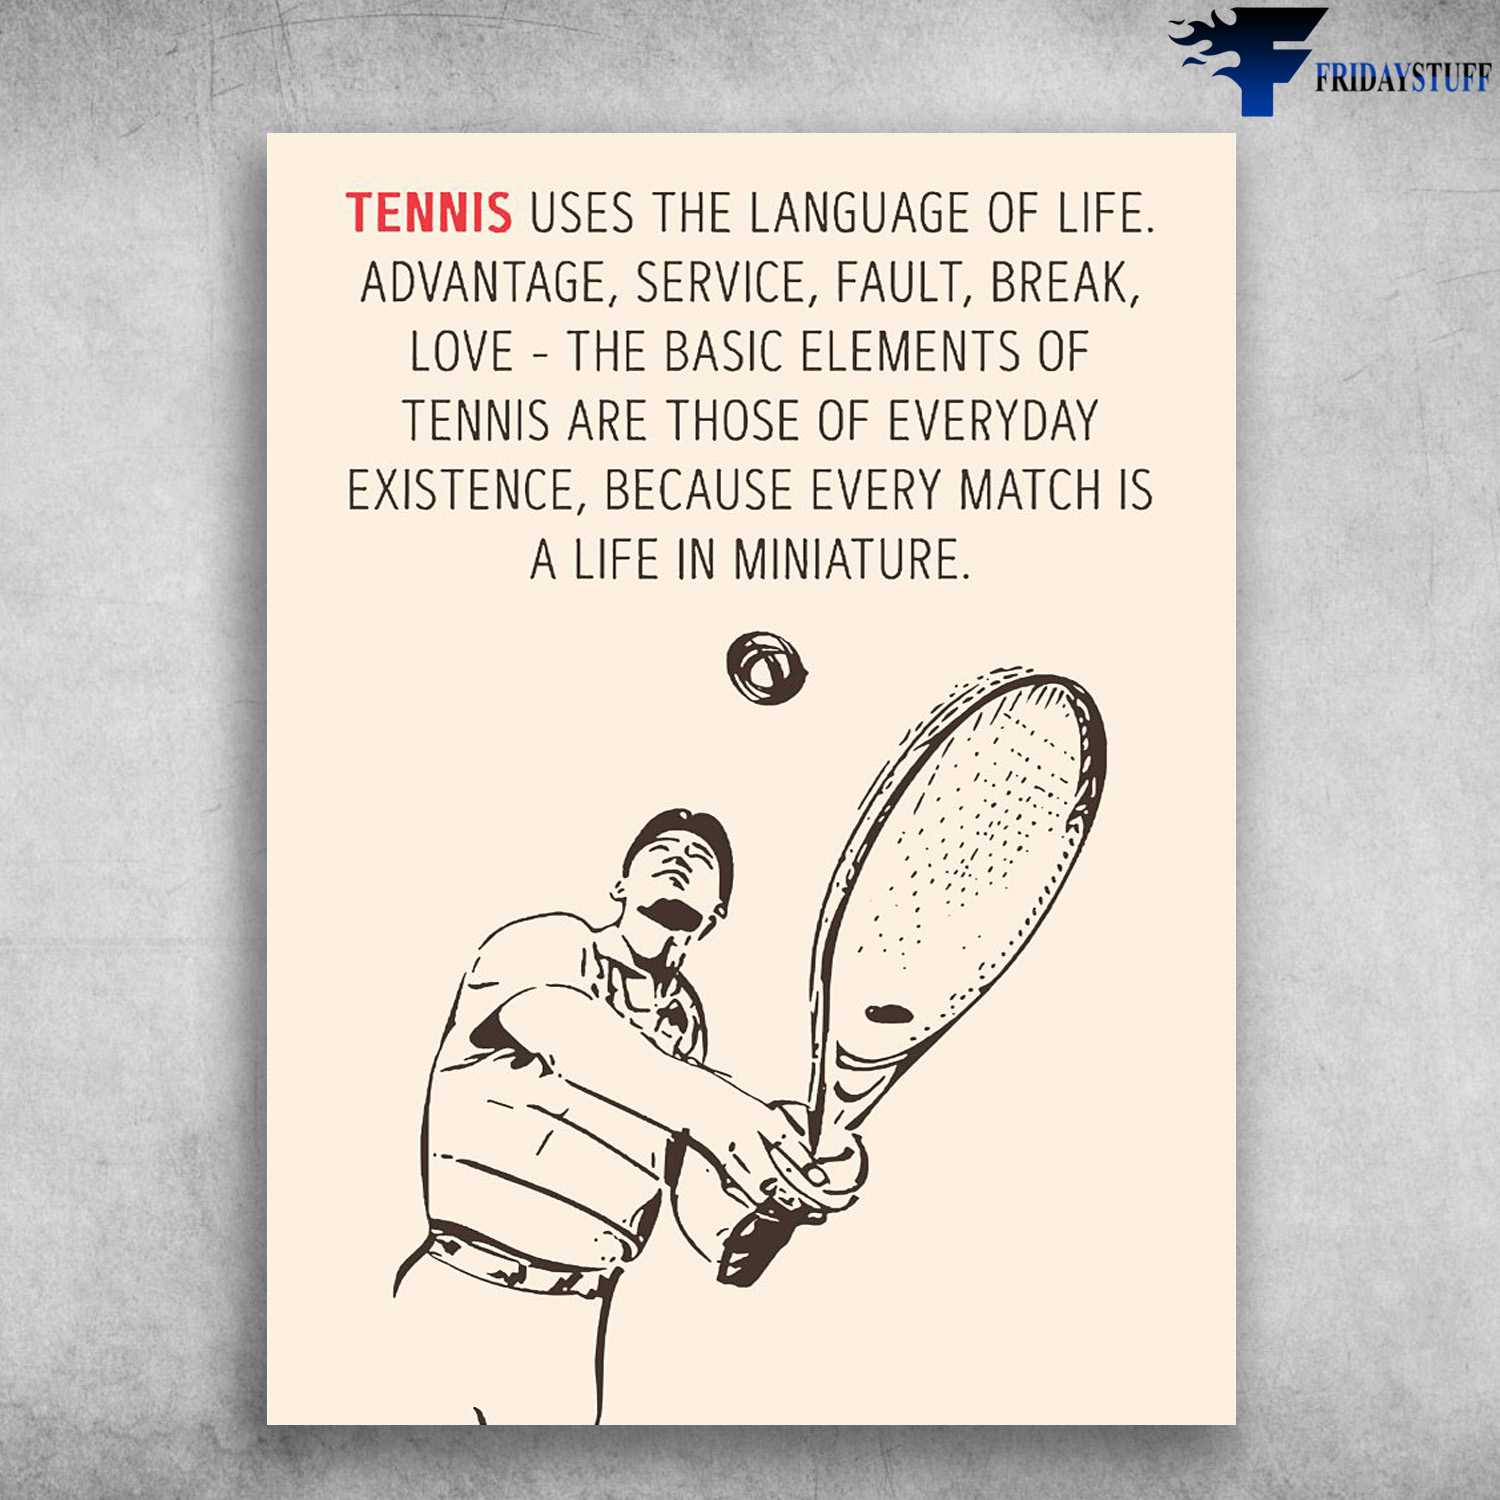 Tennis Player, Tennis Man - Tennis Uses The Language Of Life, Advantage, Service, Fault, Break, Love, The Basic Elements Of Tennis Are Those Of Everyday